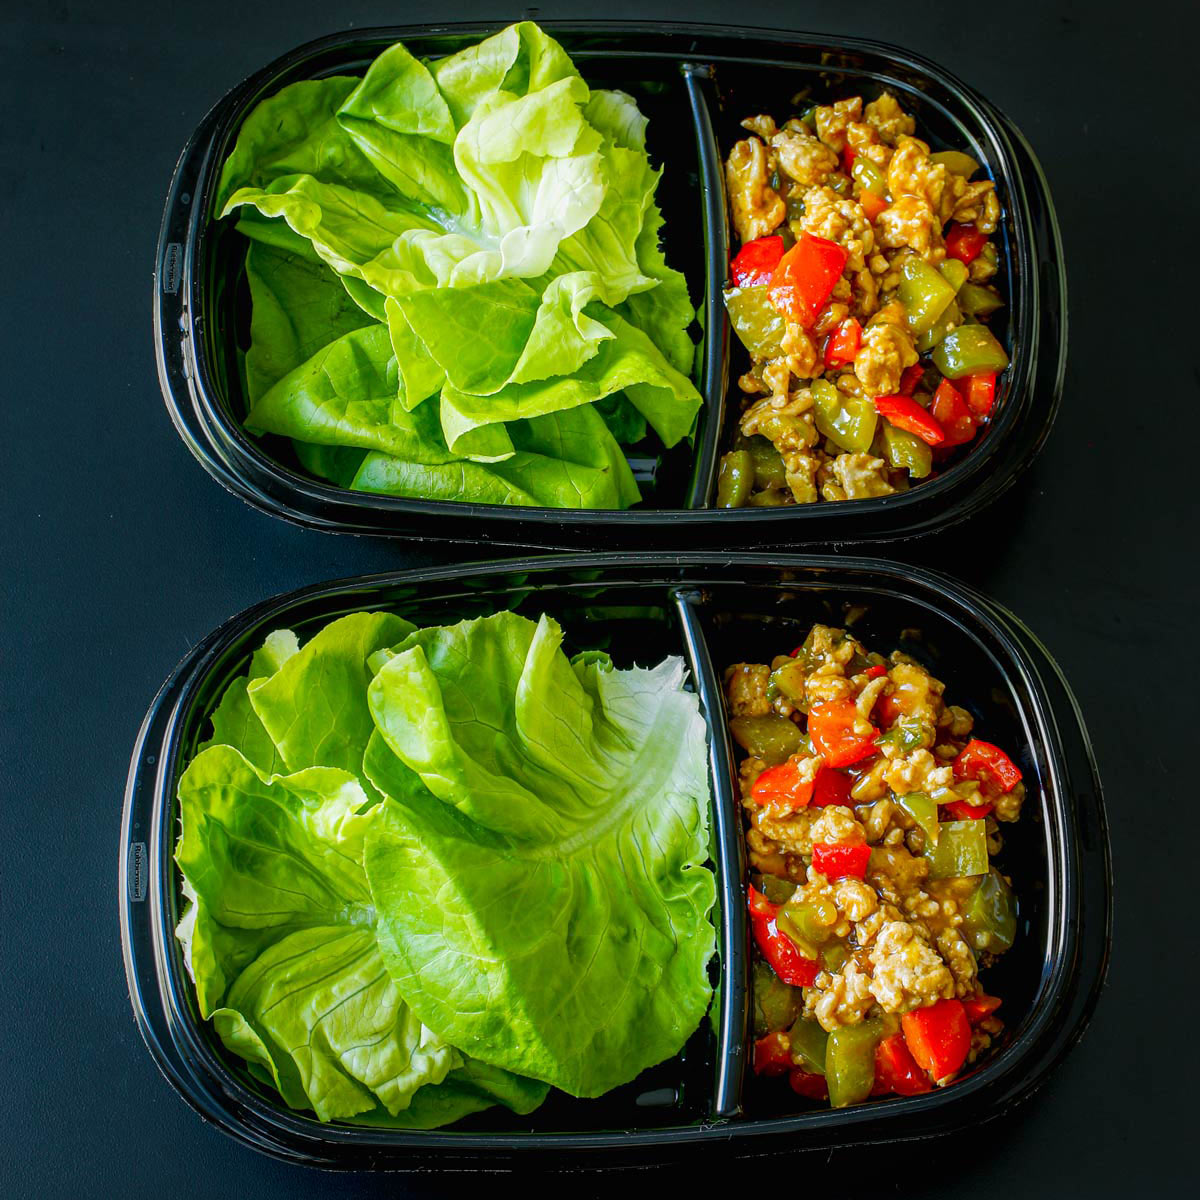 Meal Prepping Bowl Recipes: 9 Ideas So Your lunches Are Stress